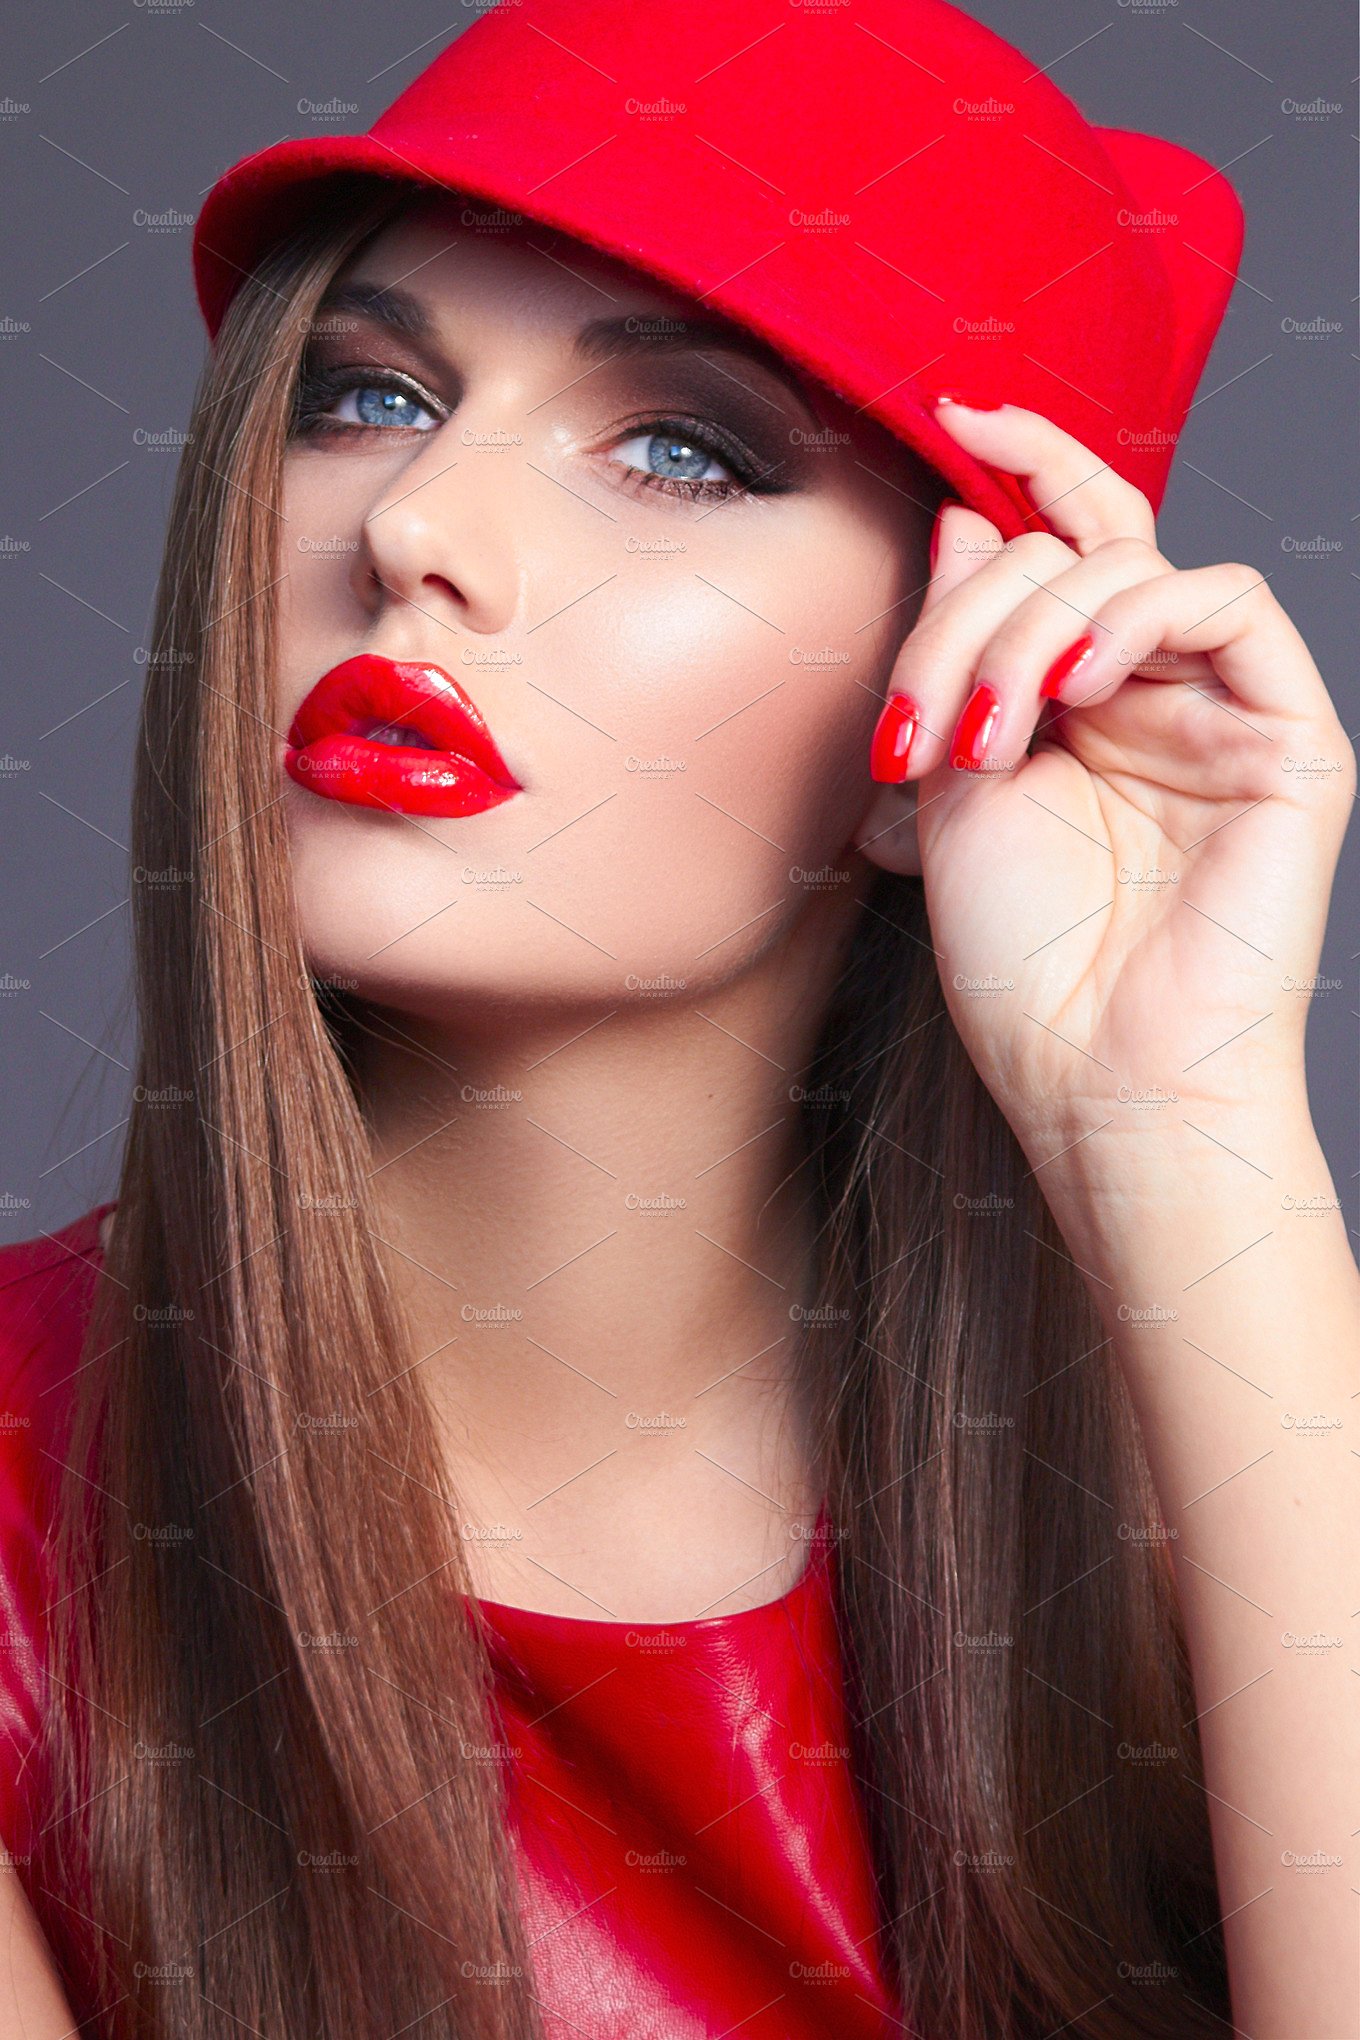 Girl in a red hat. ~ Beauty & Fashion Photos ~ Creative Market